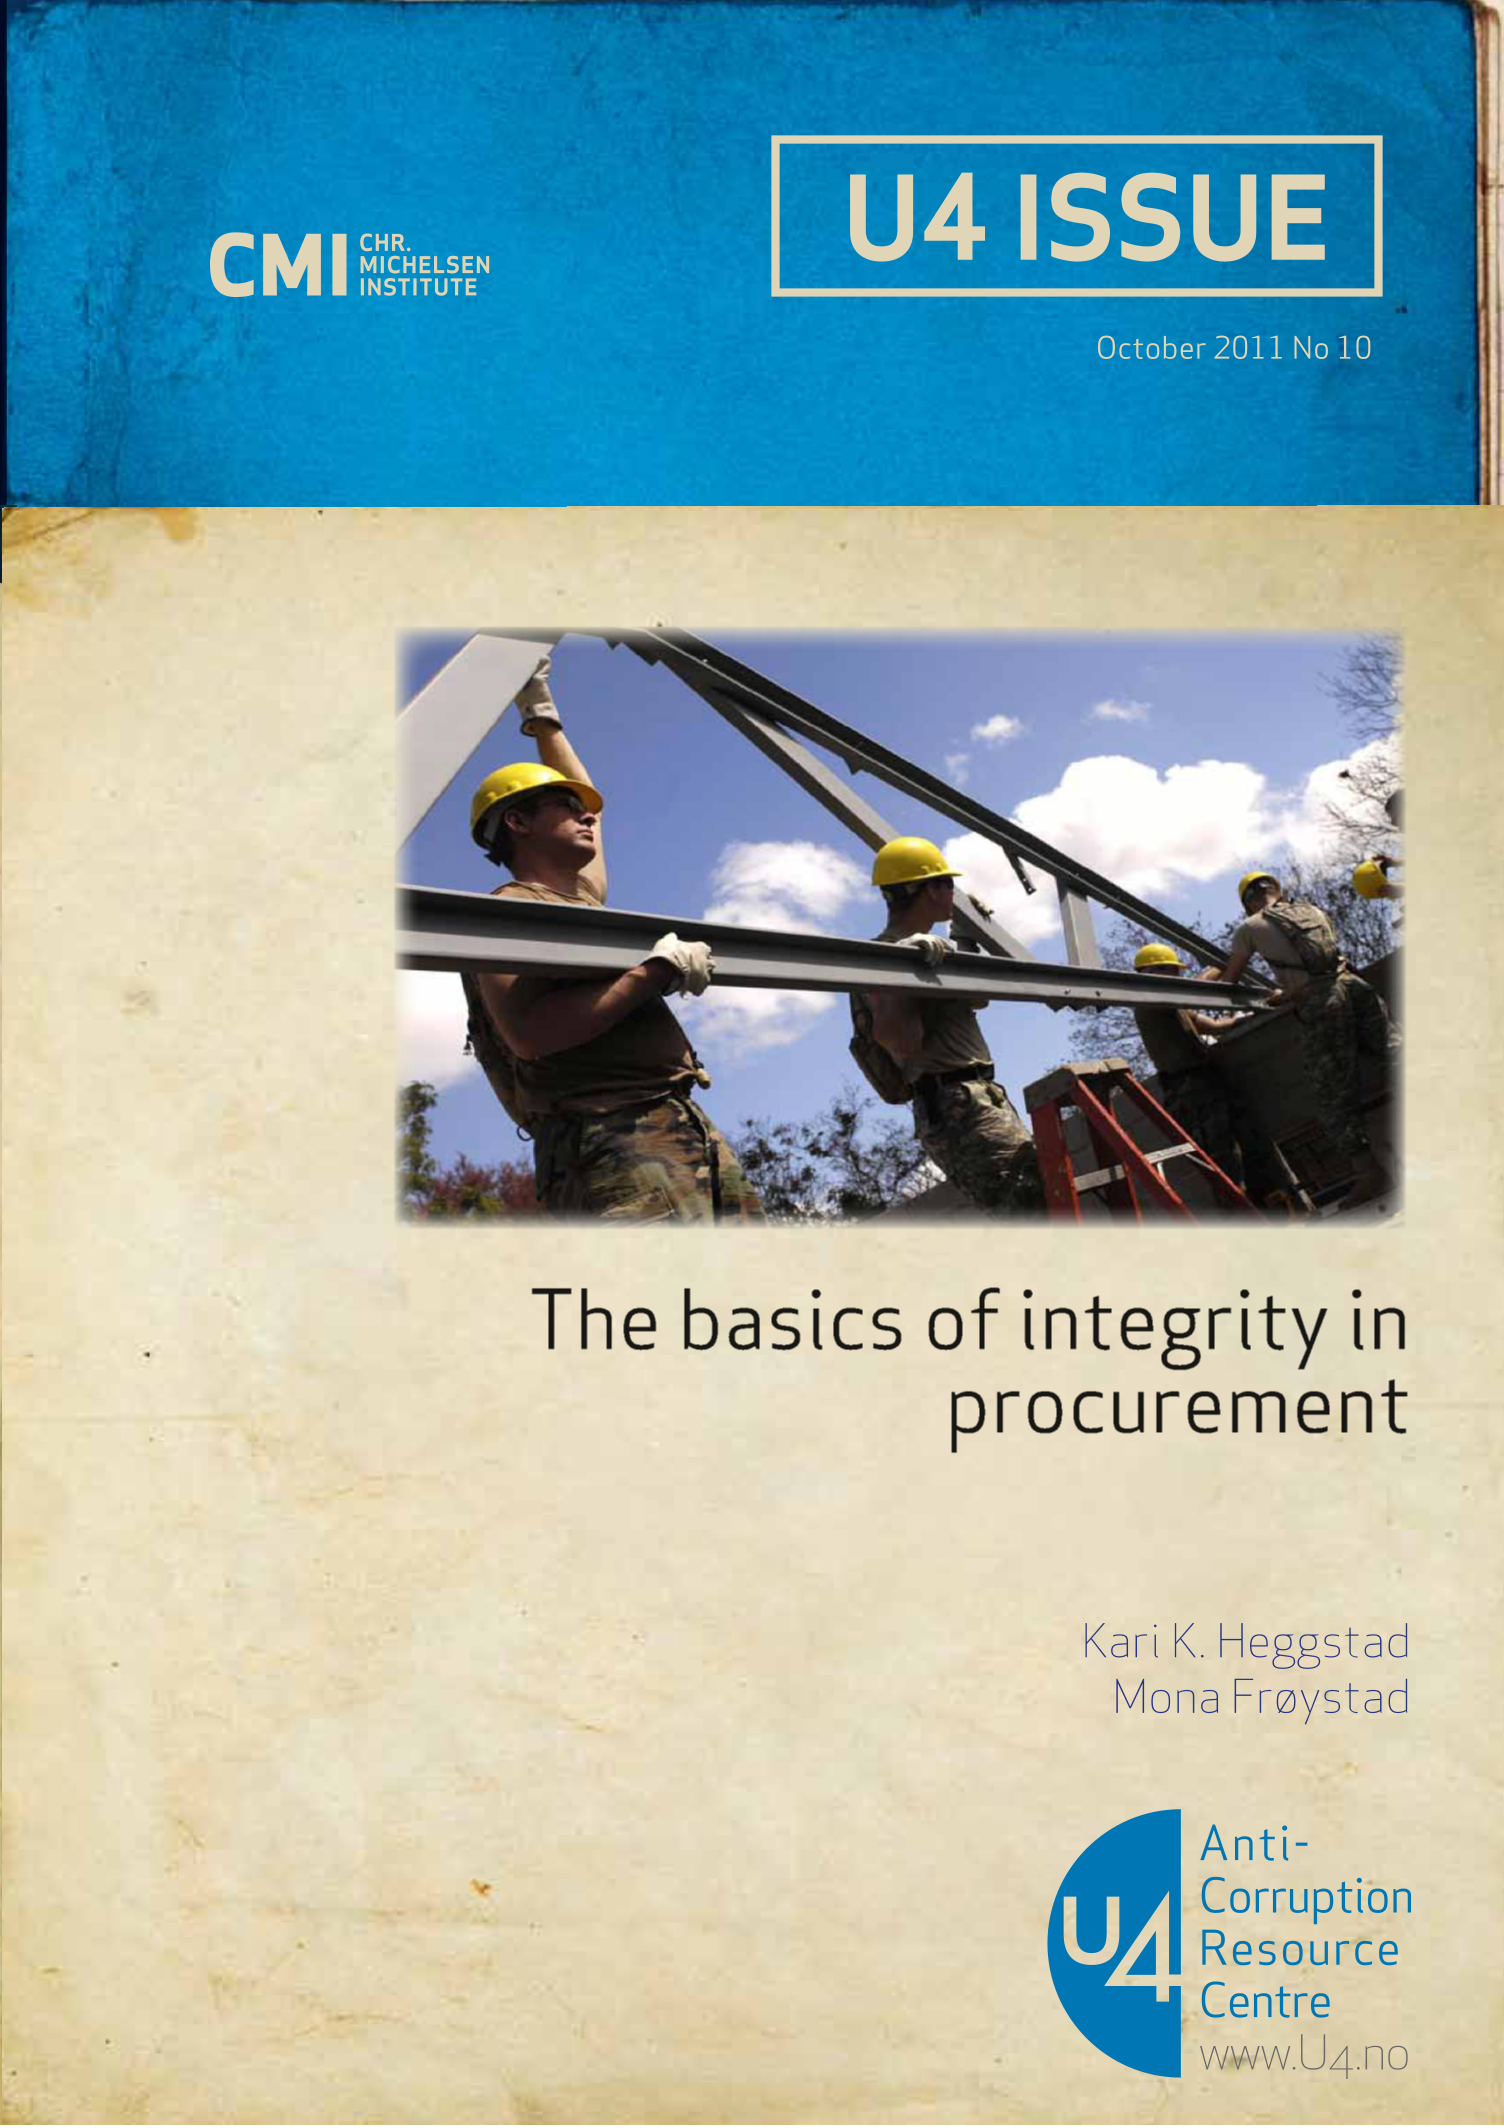 The basics of integrity in procurement